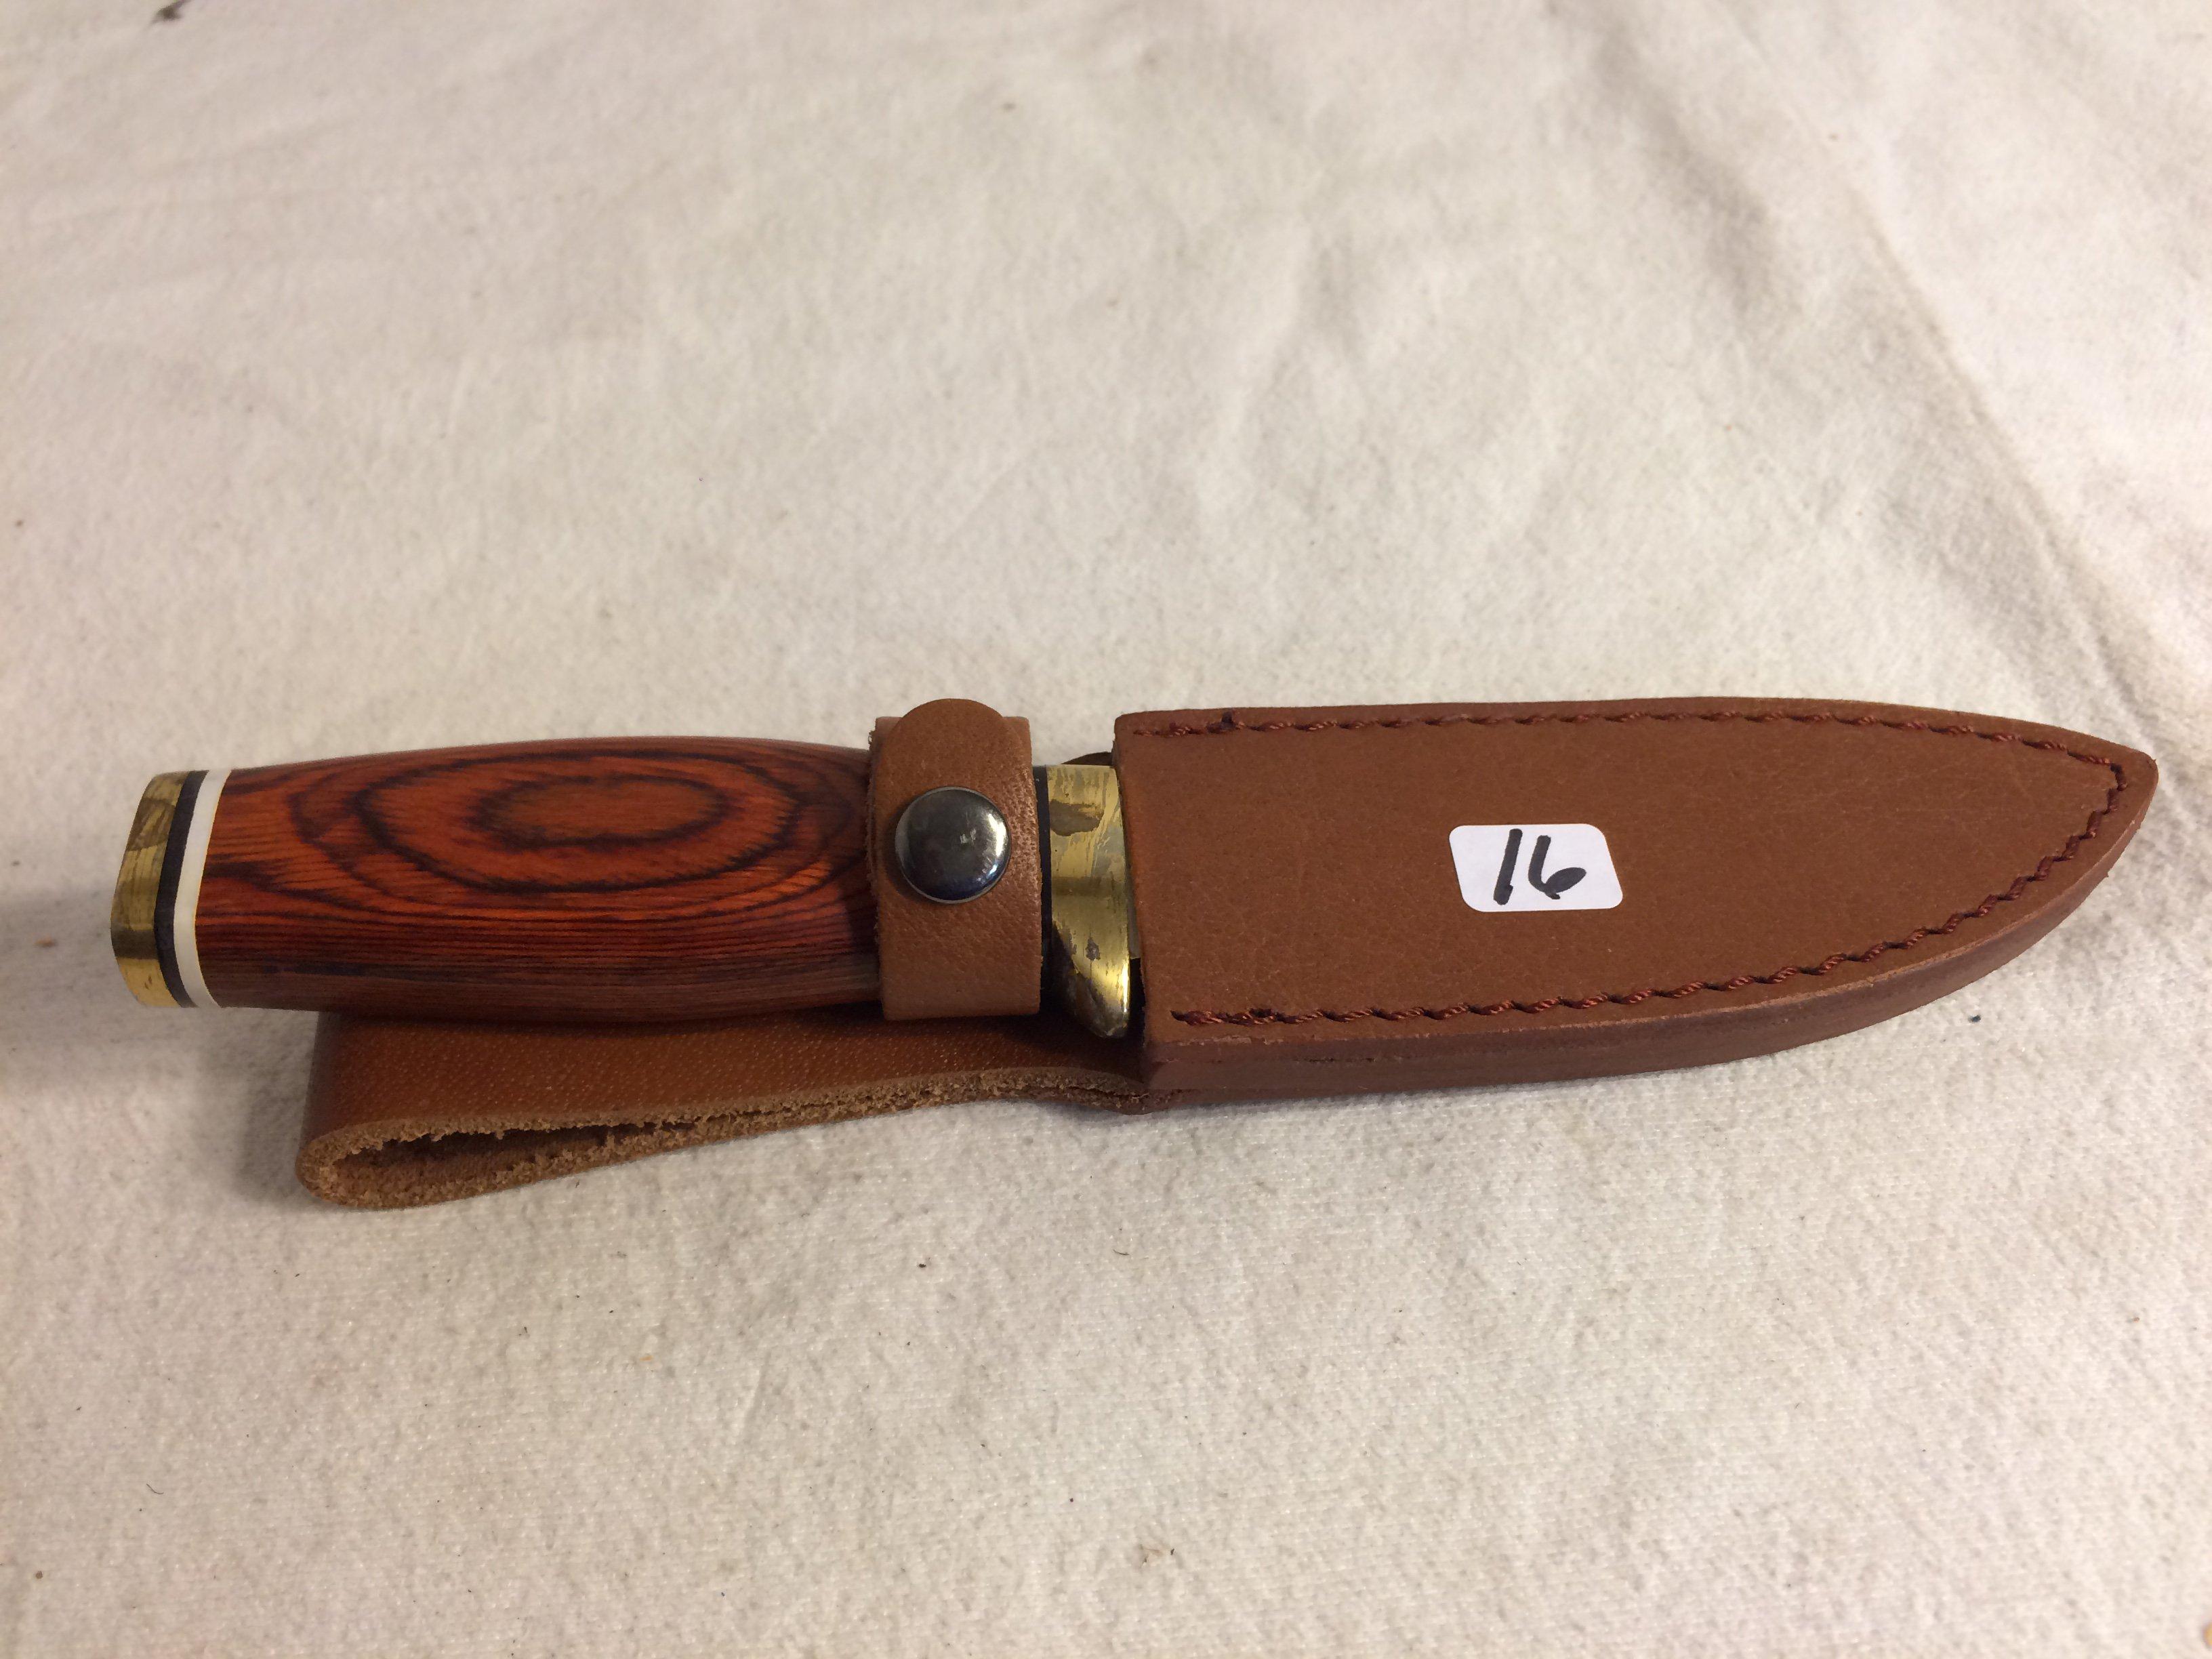 Collector Frost Cutlery Deer Design Wood Handle Hunting Knife Size:8.5/8" Overall Length Knife